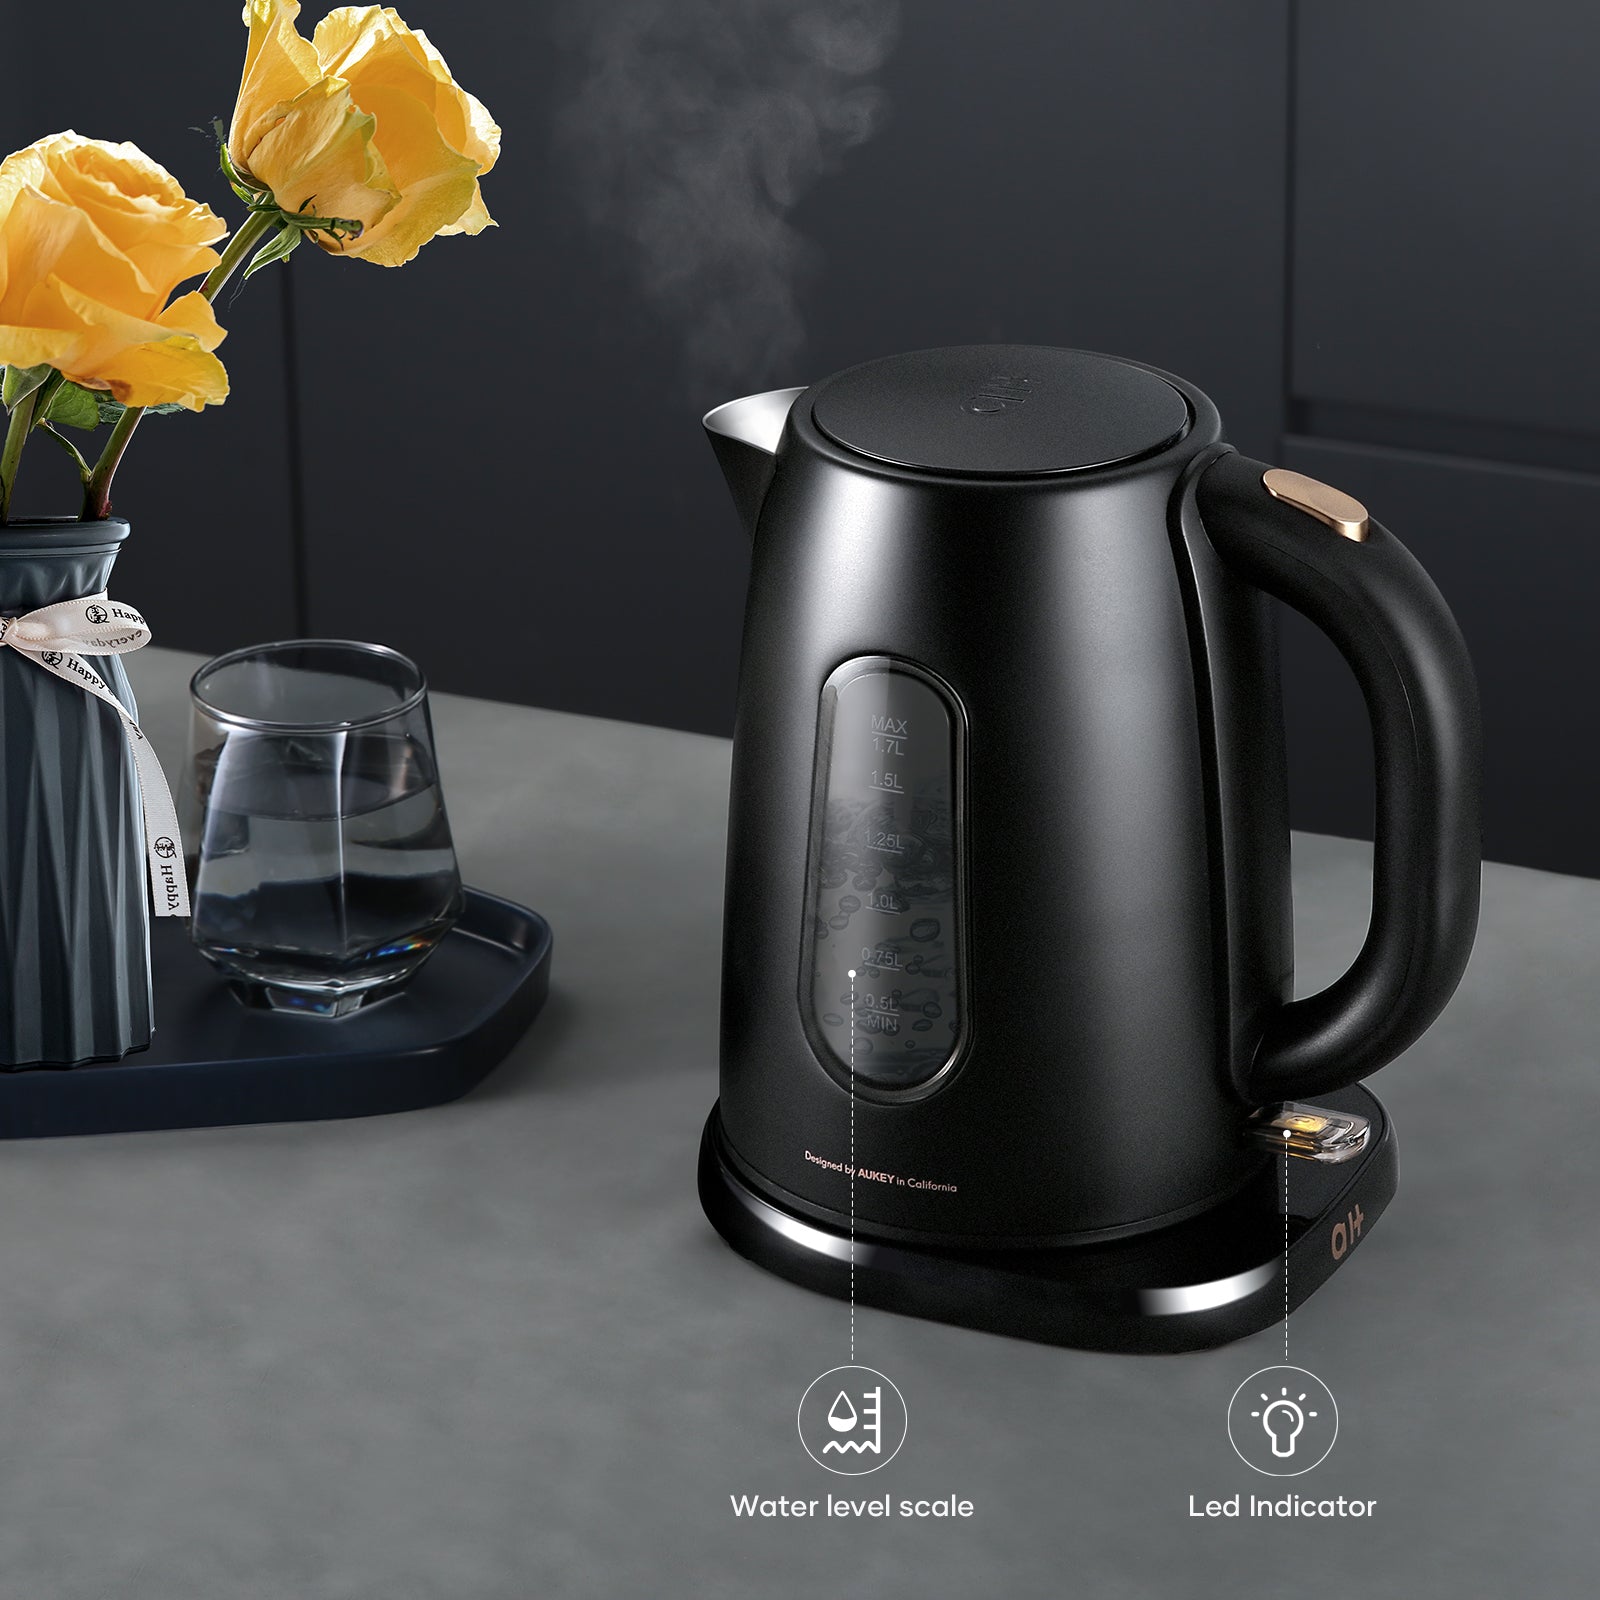 Swift Pour 3L: Fast Boil Electric Kettle with Auto Power-Off